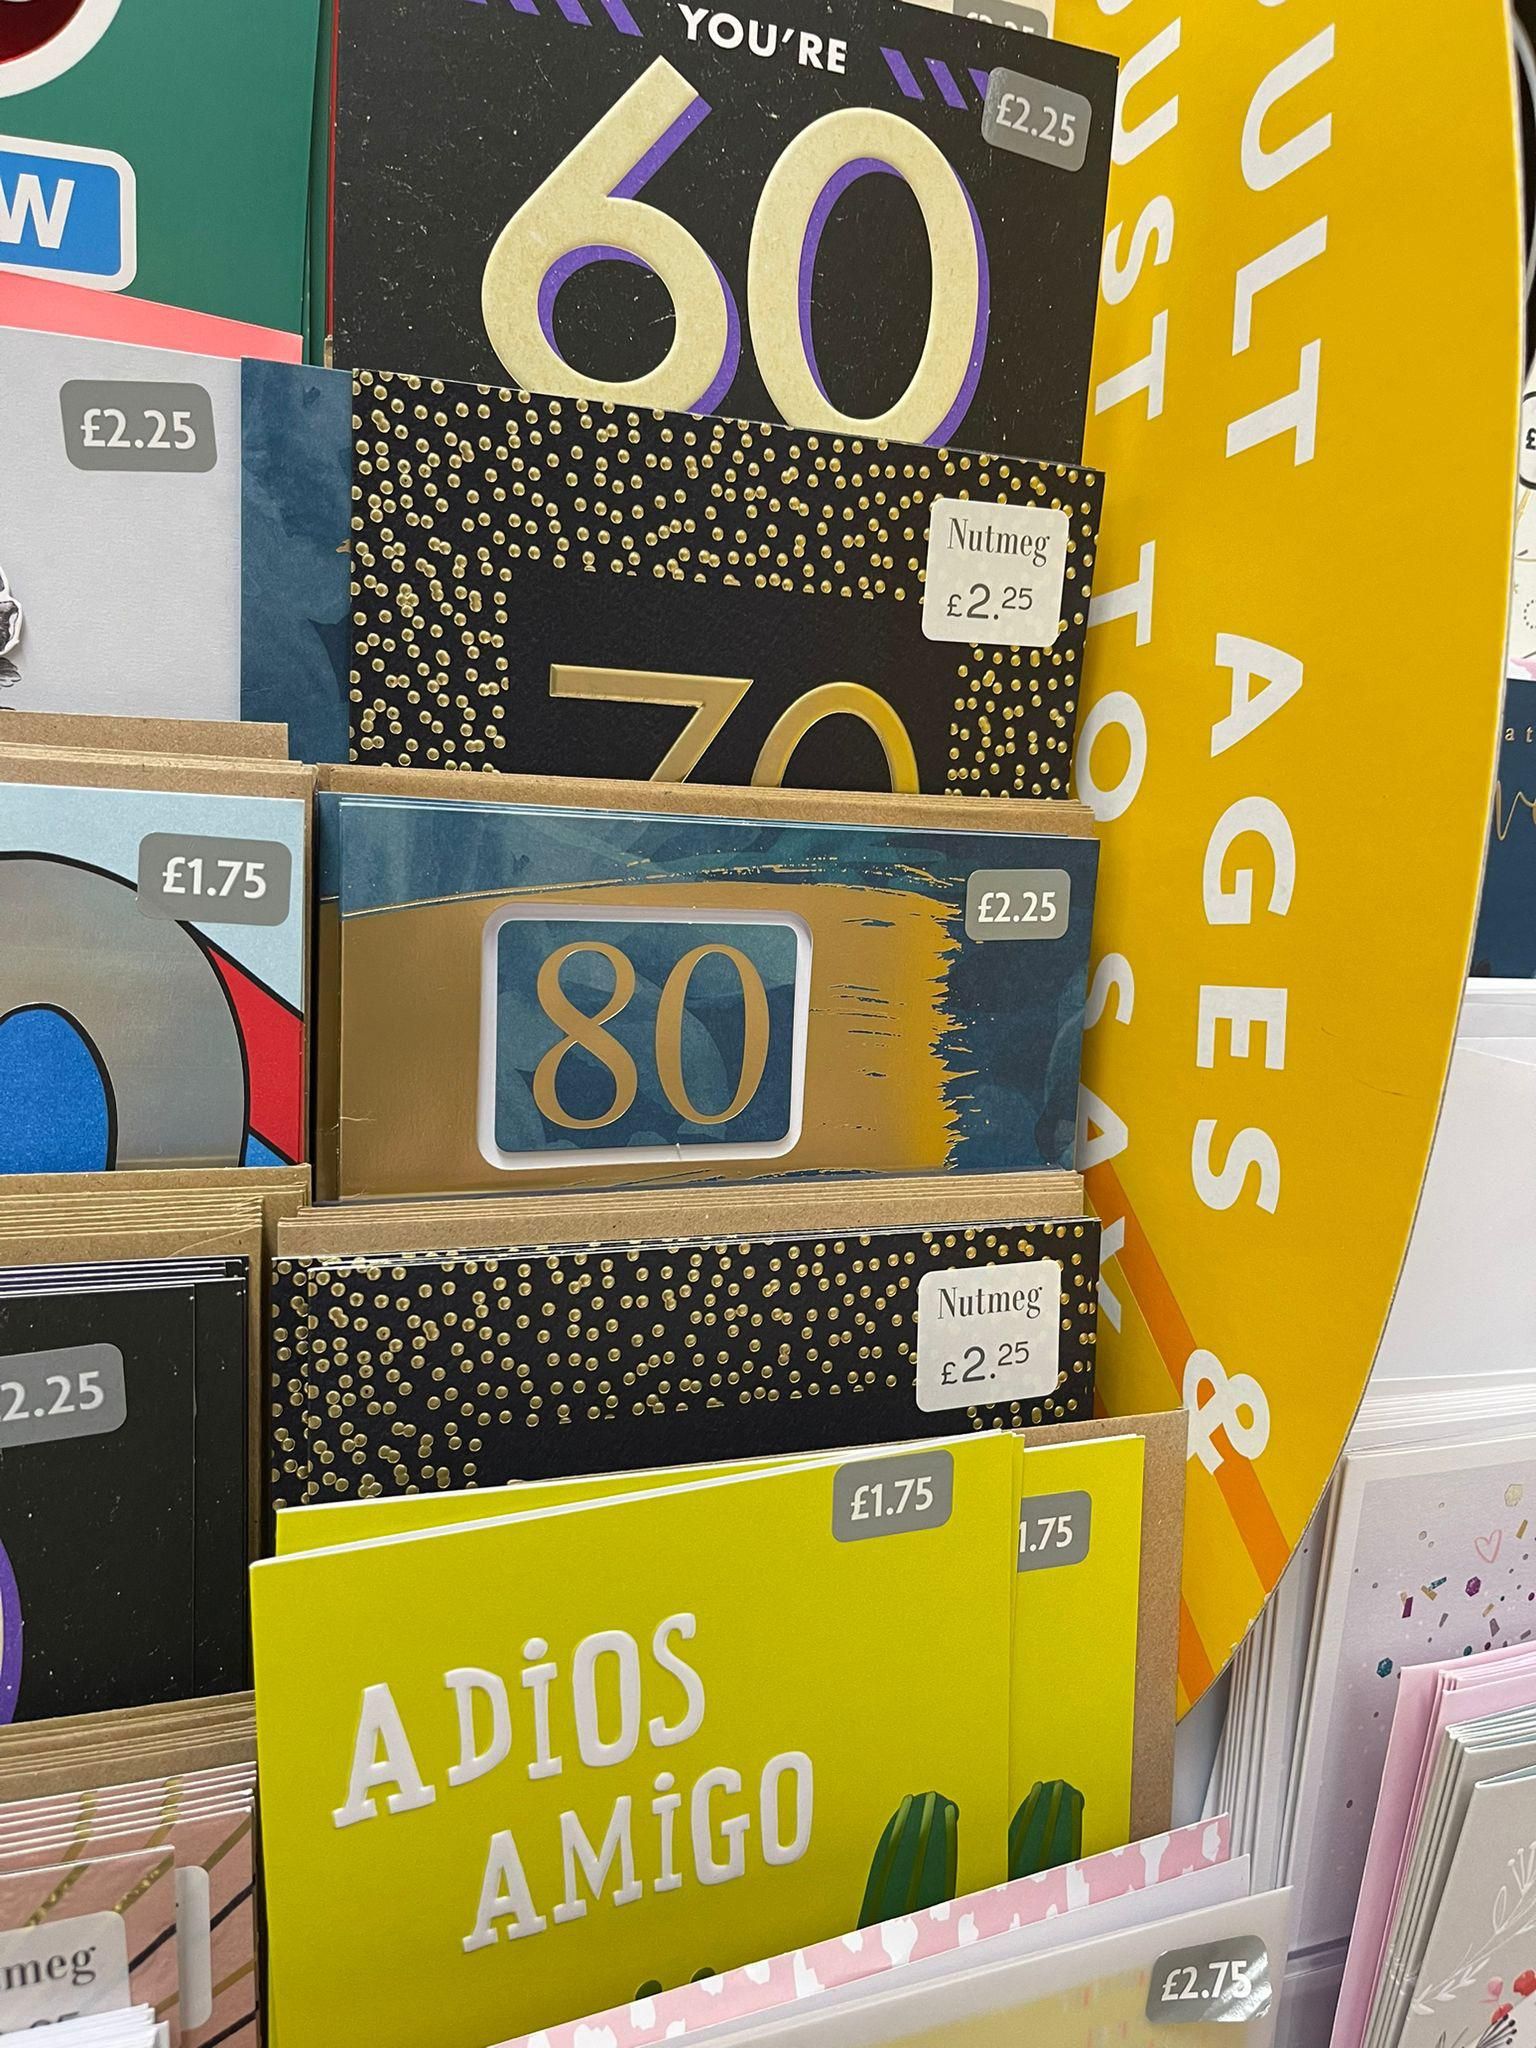 This birthday card display is a bit insensitive…